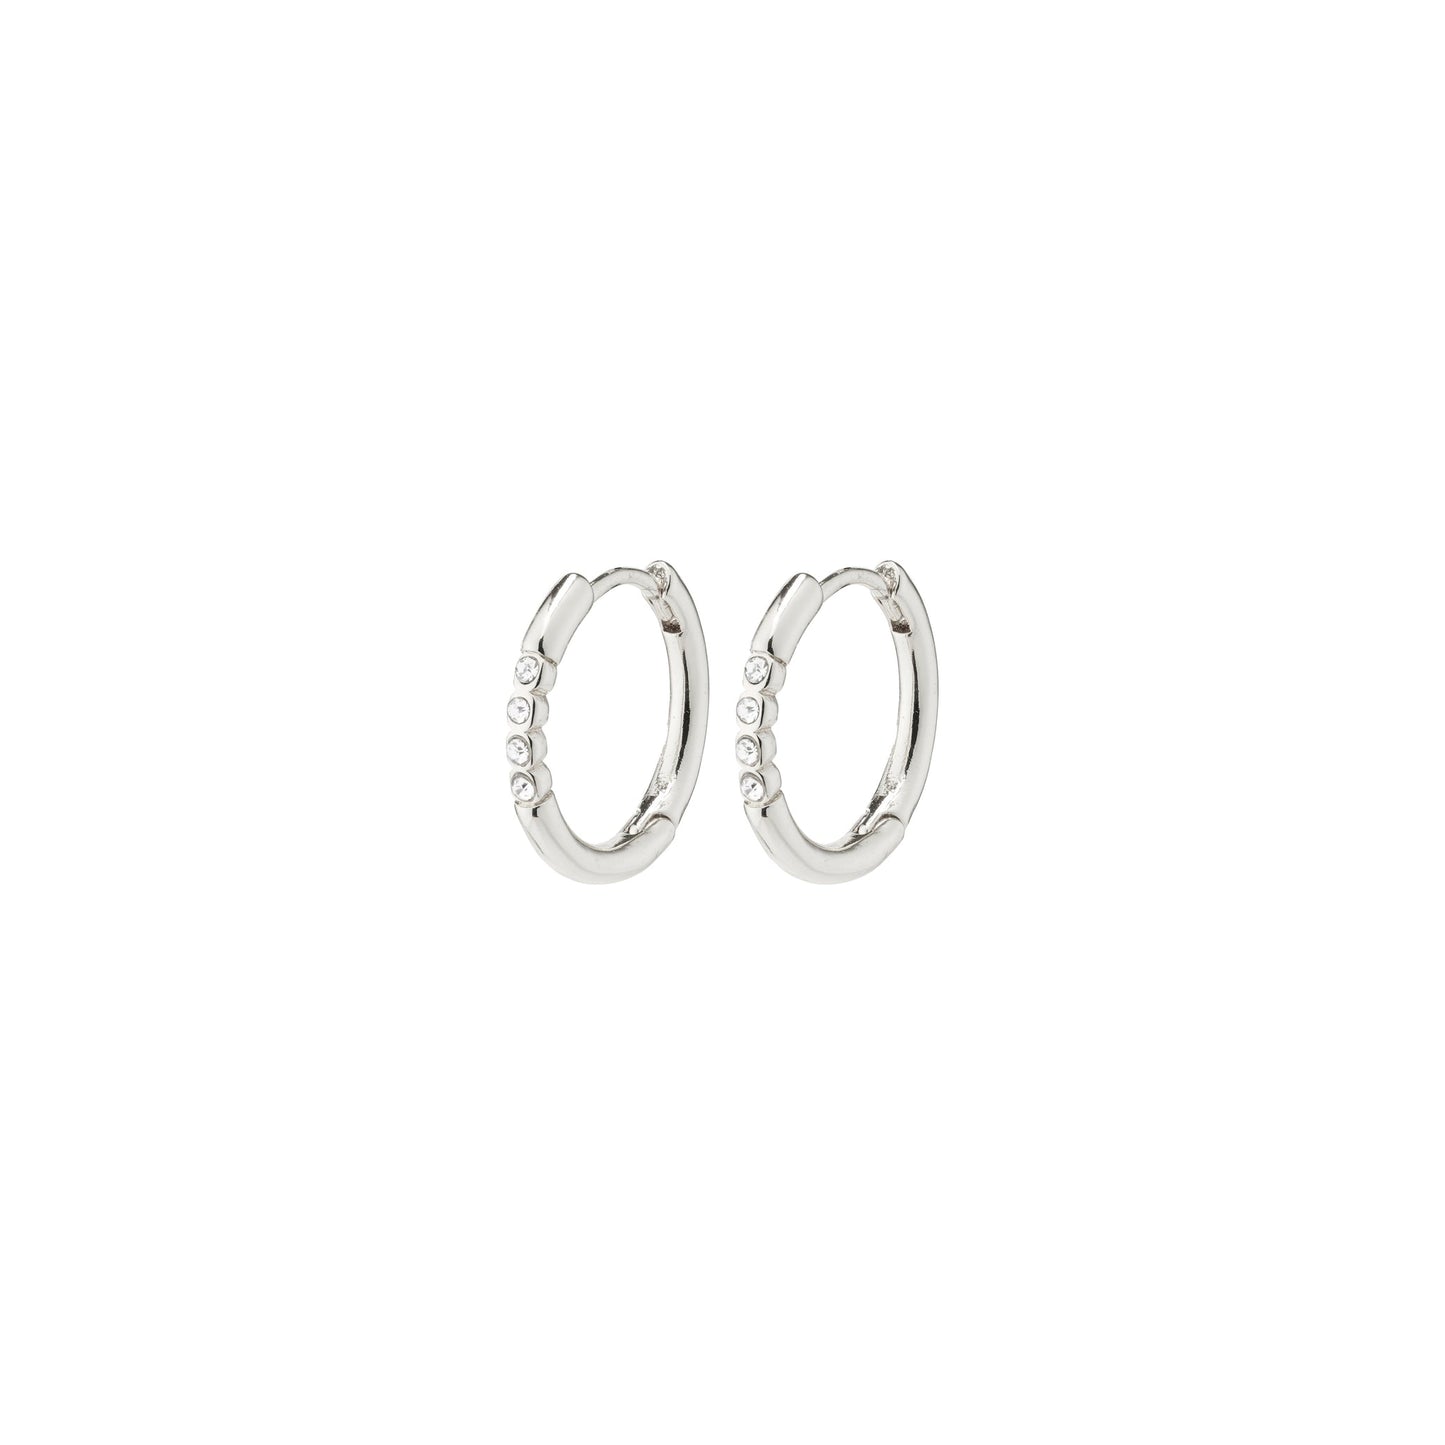 Turdy Small Earrings - Silver Plated